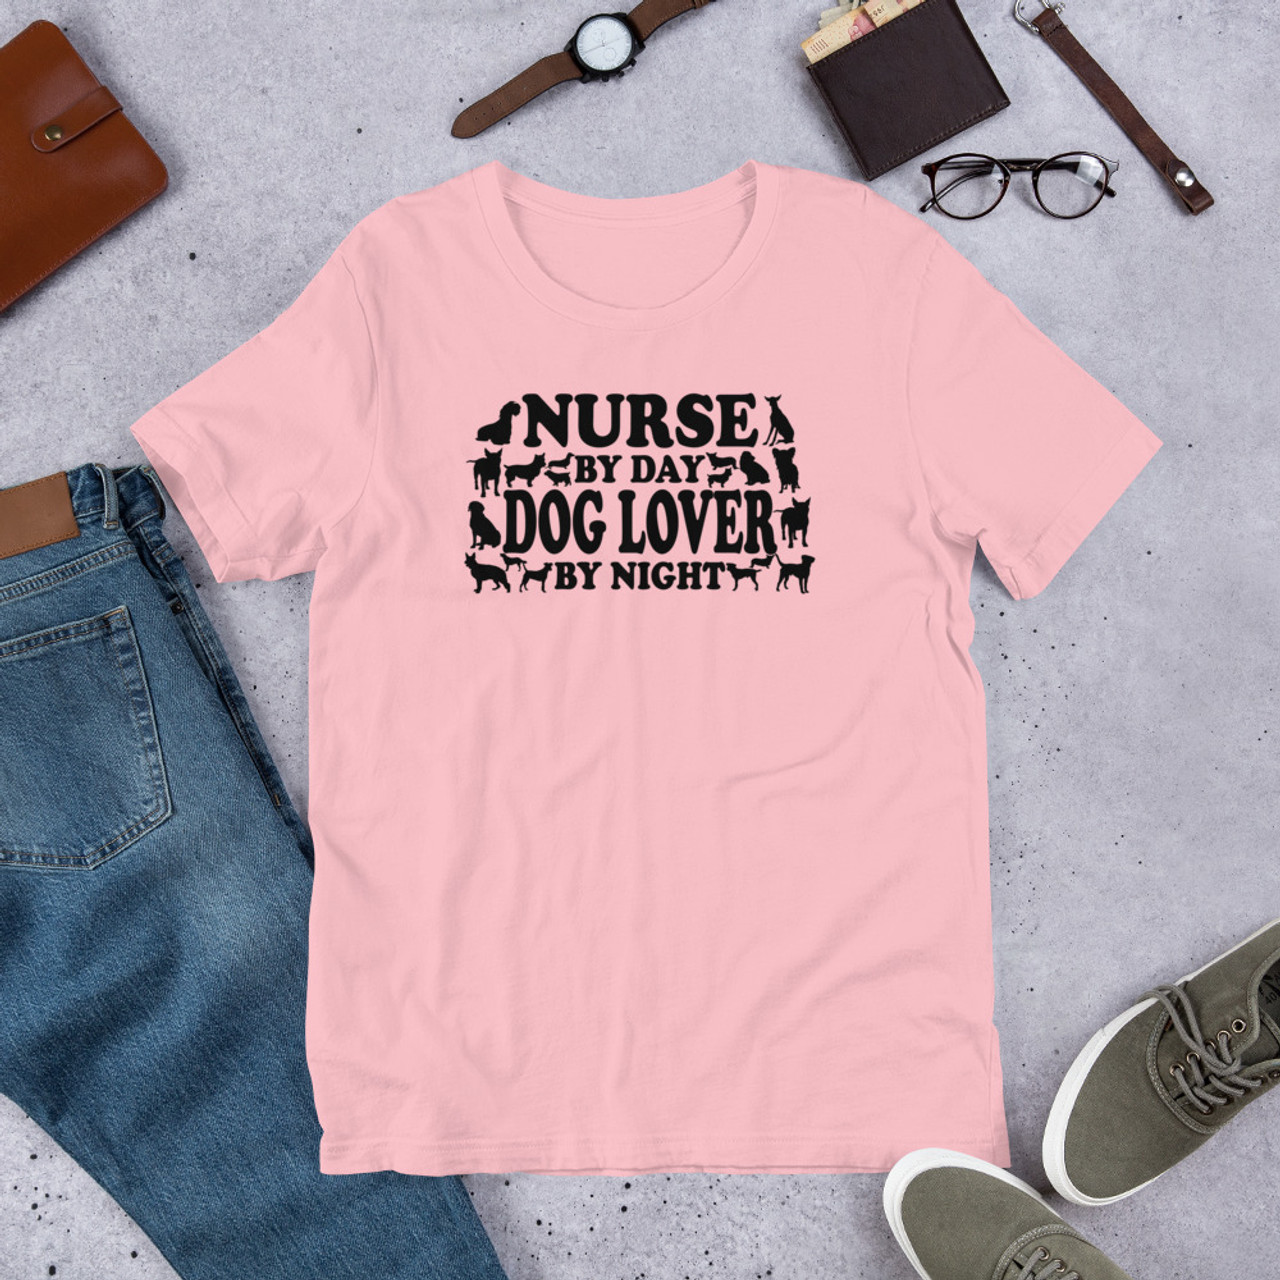 Pink T-Shirt - Bella + Canvas 3001 Nurse By Day Dog Lover By Night